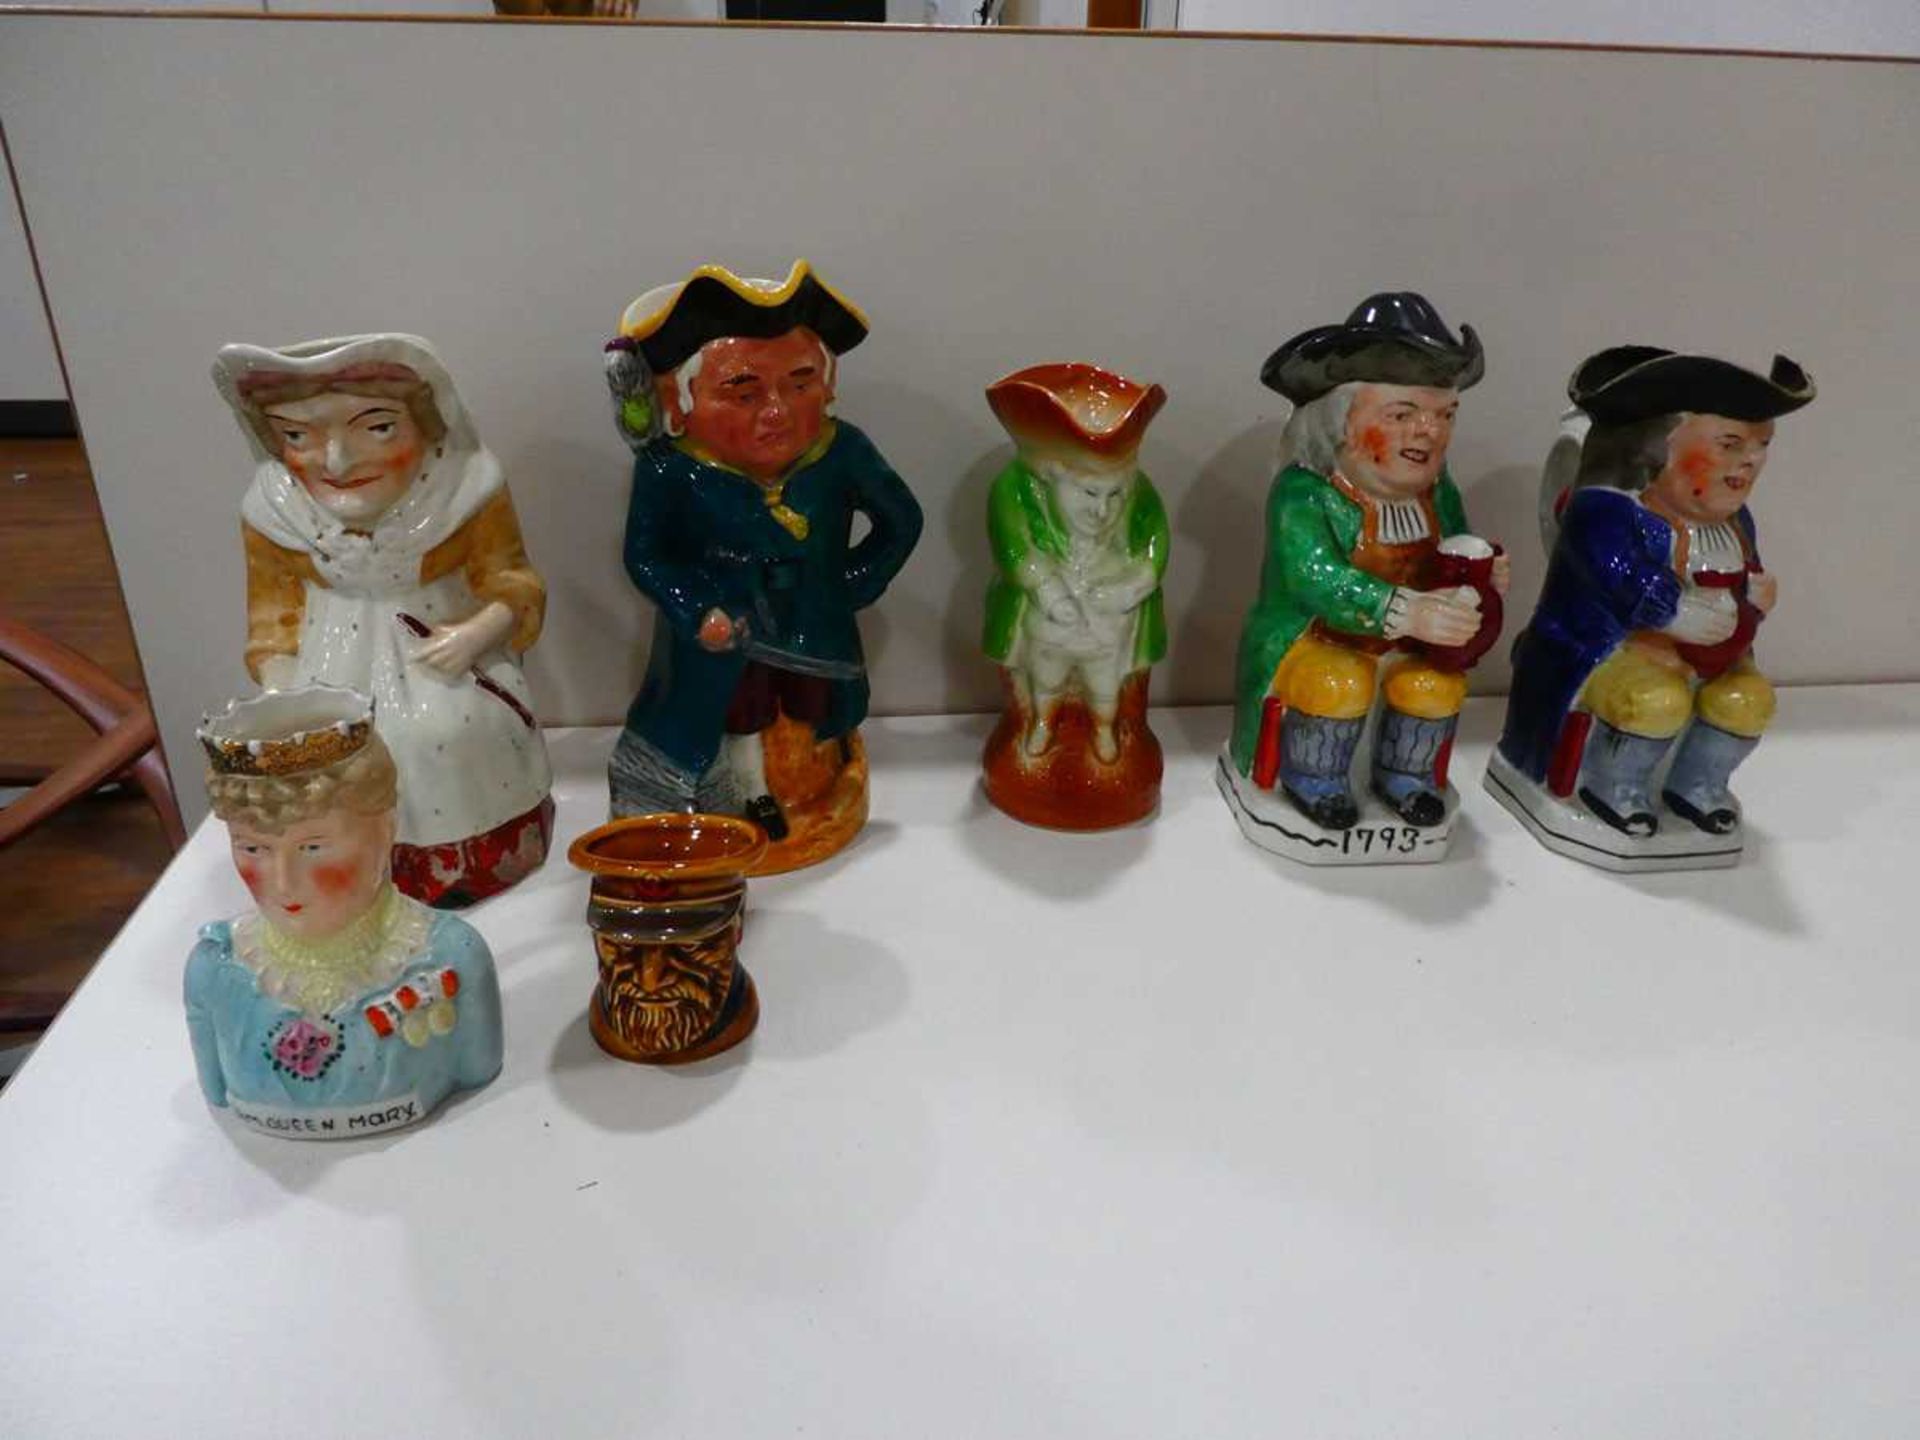 Large quantity of Staffordshire flatpack figures, character jugs and dogs - Image 3 of 5